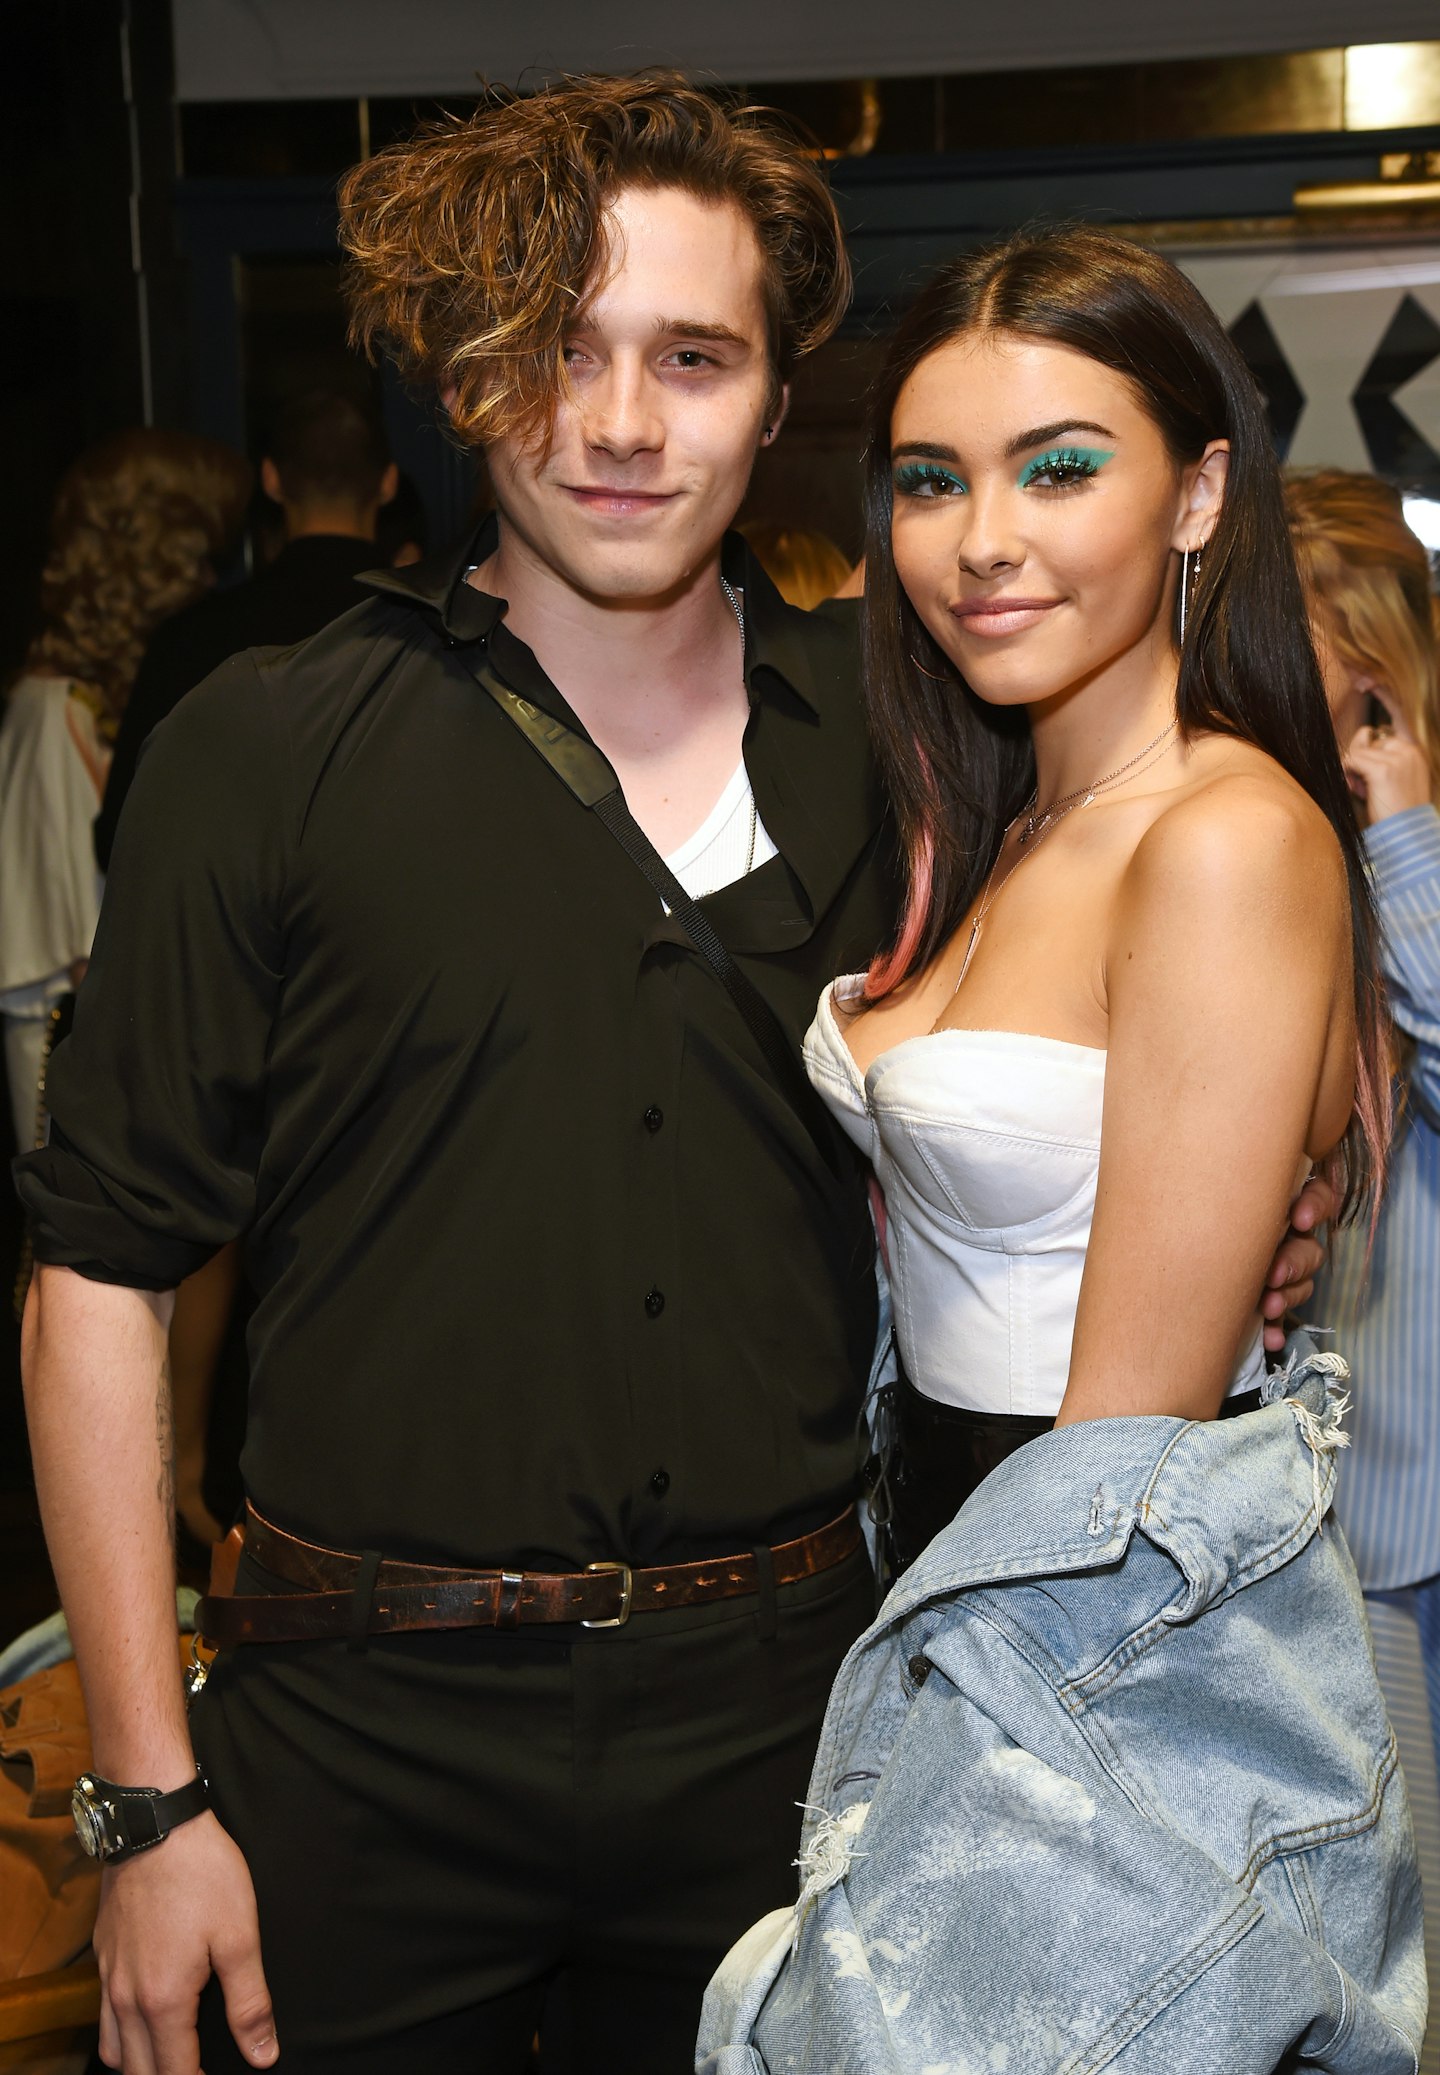 Brooklyn Beckham and Madison Beer